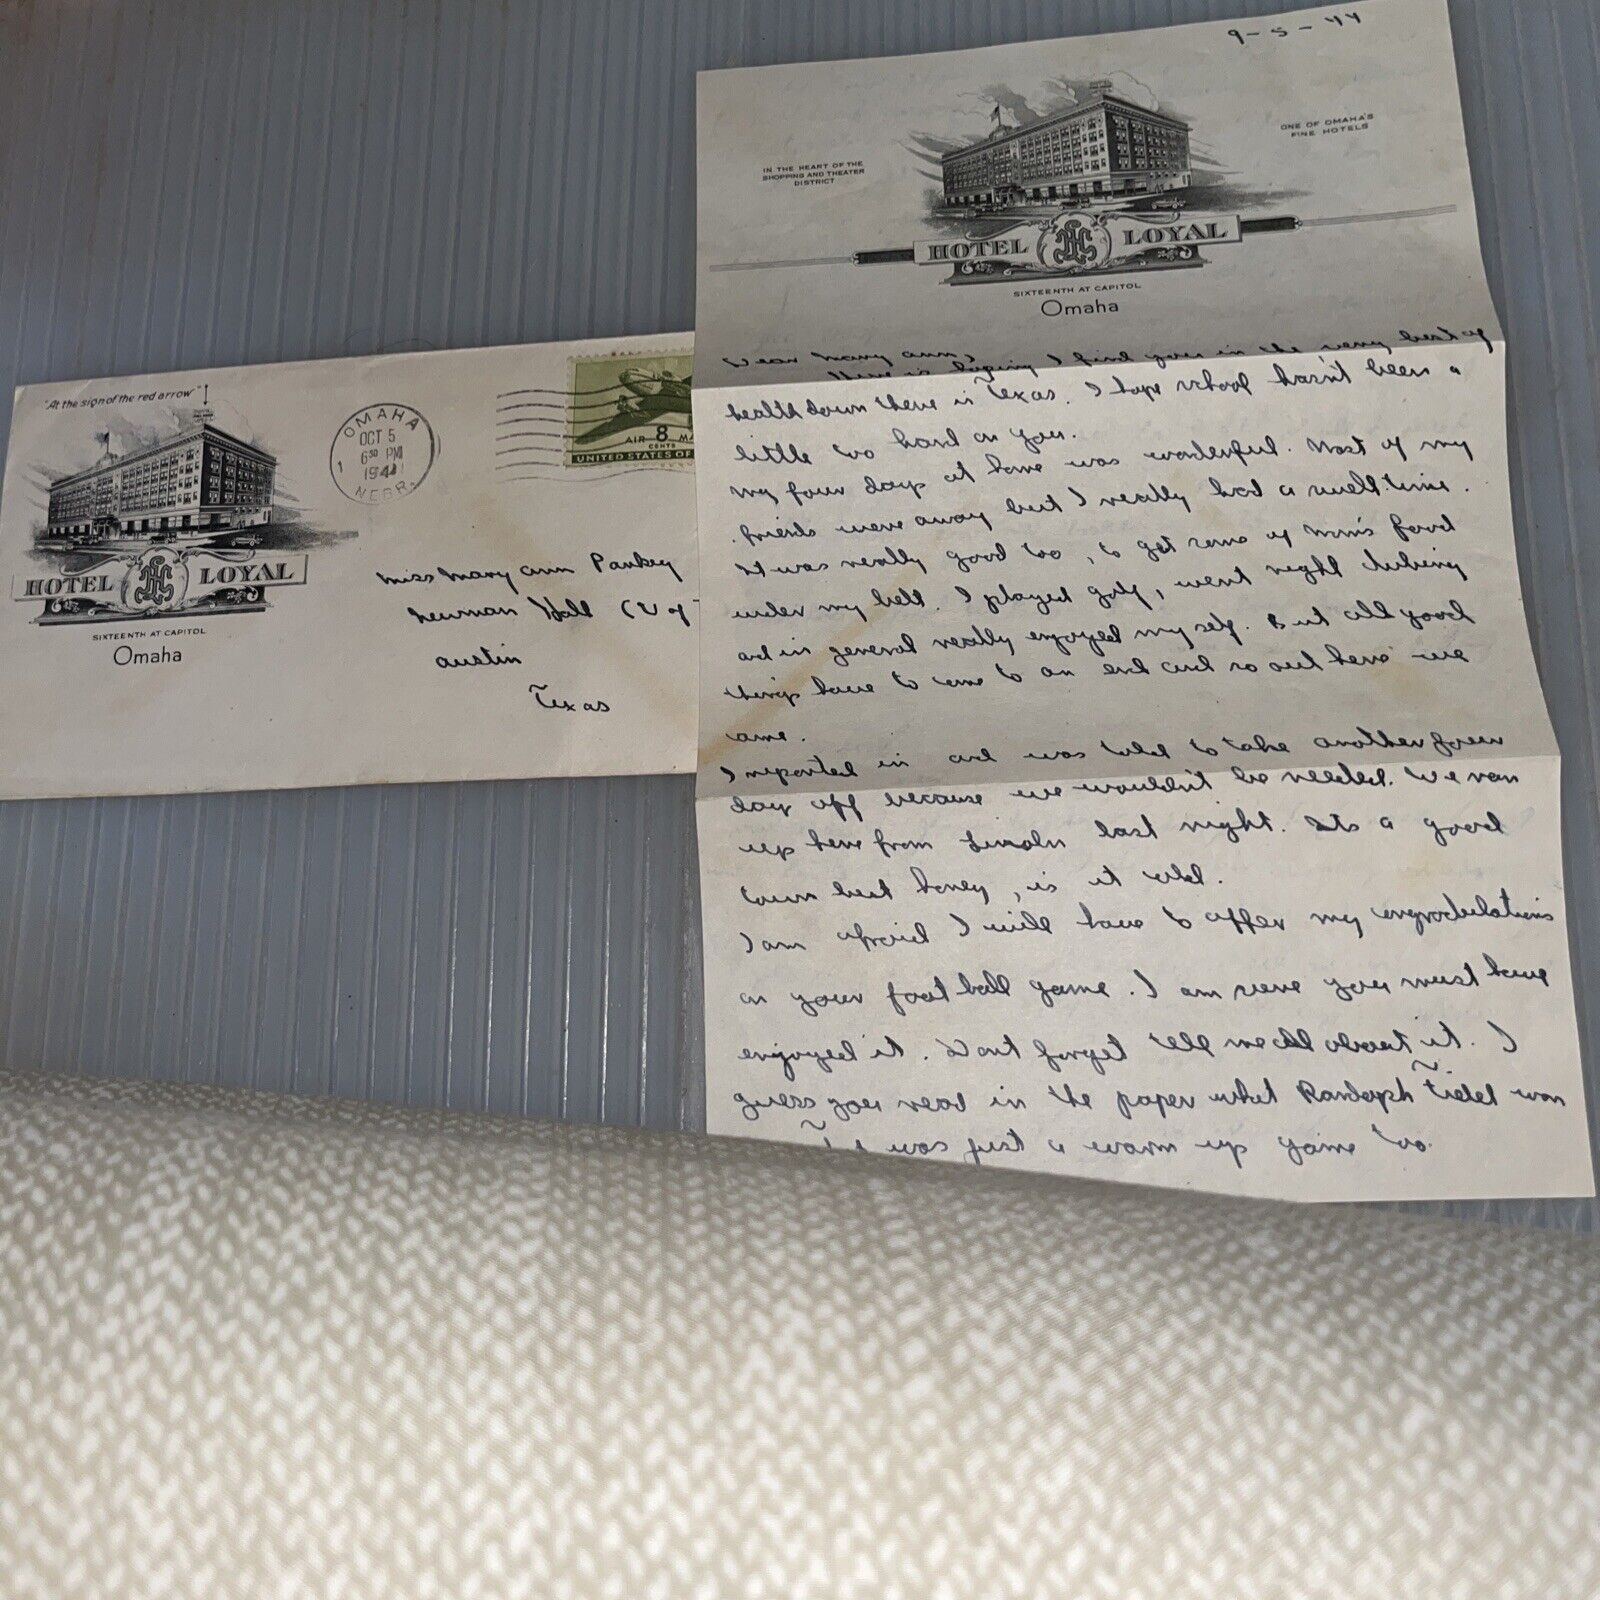 1944 Letter from Private Moving Army Air Base: Hotel Loyal Letterhead Omaha NE